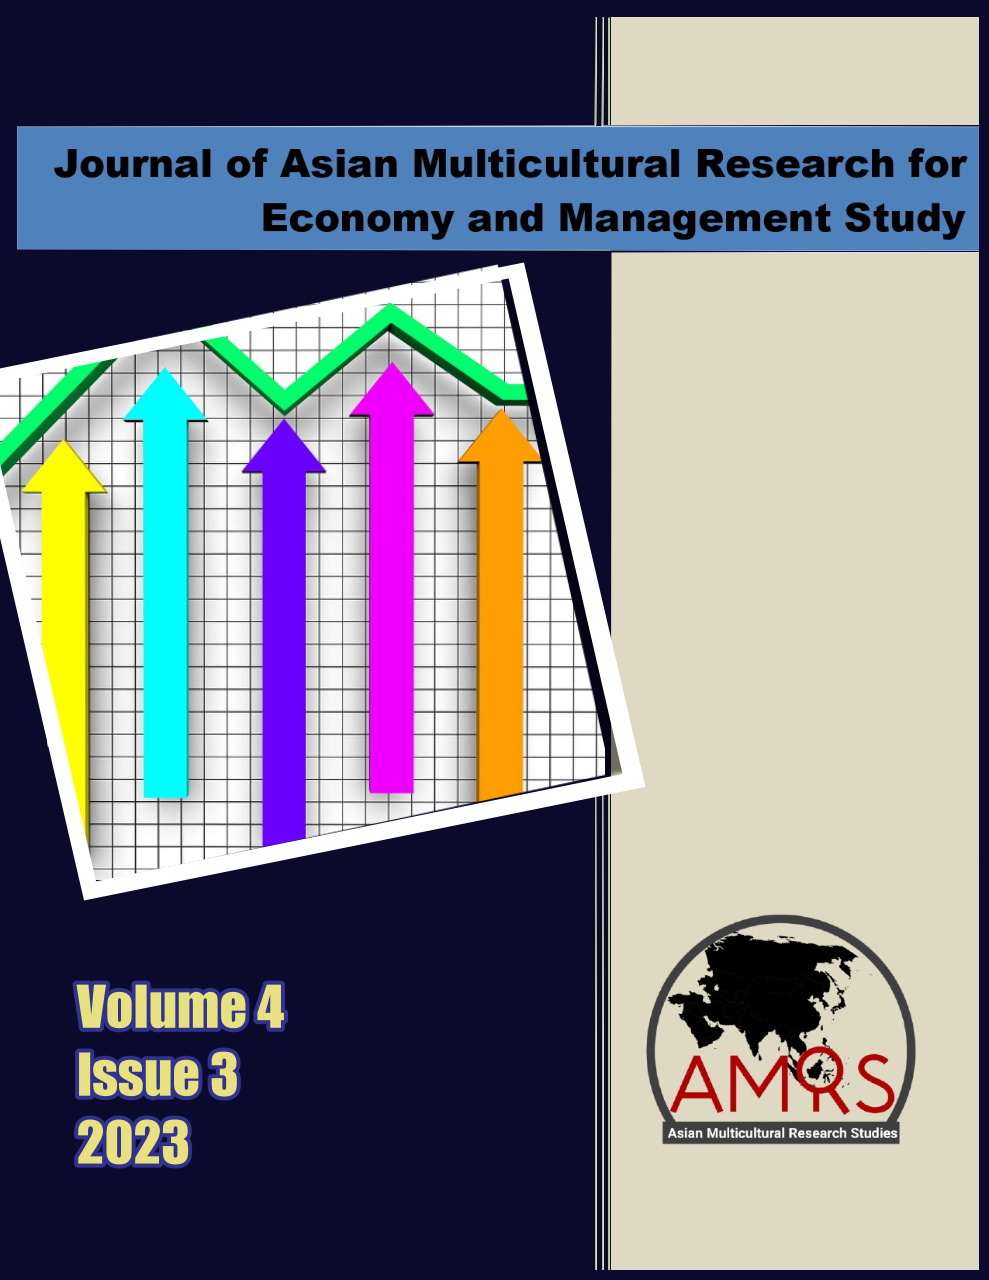 					View Vol. 4 No. 3 (2023): Journal of Asian Multicultural Research for Economy and Management Study
				